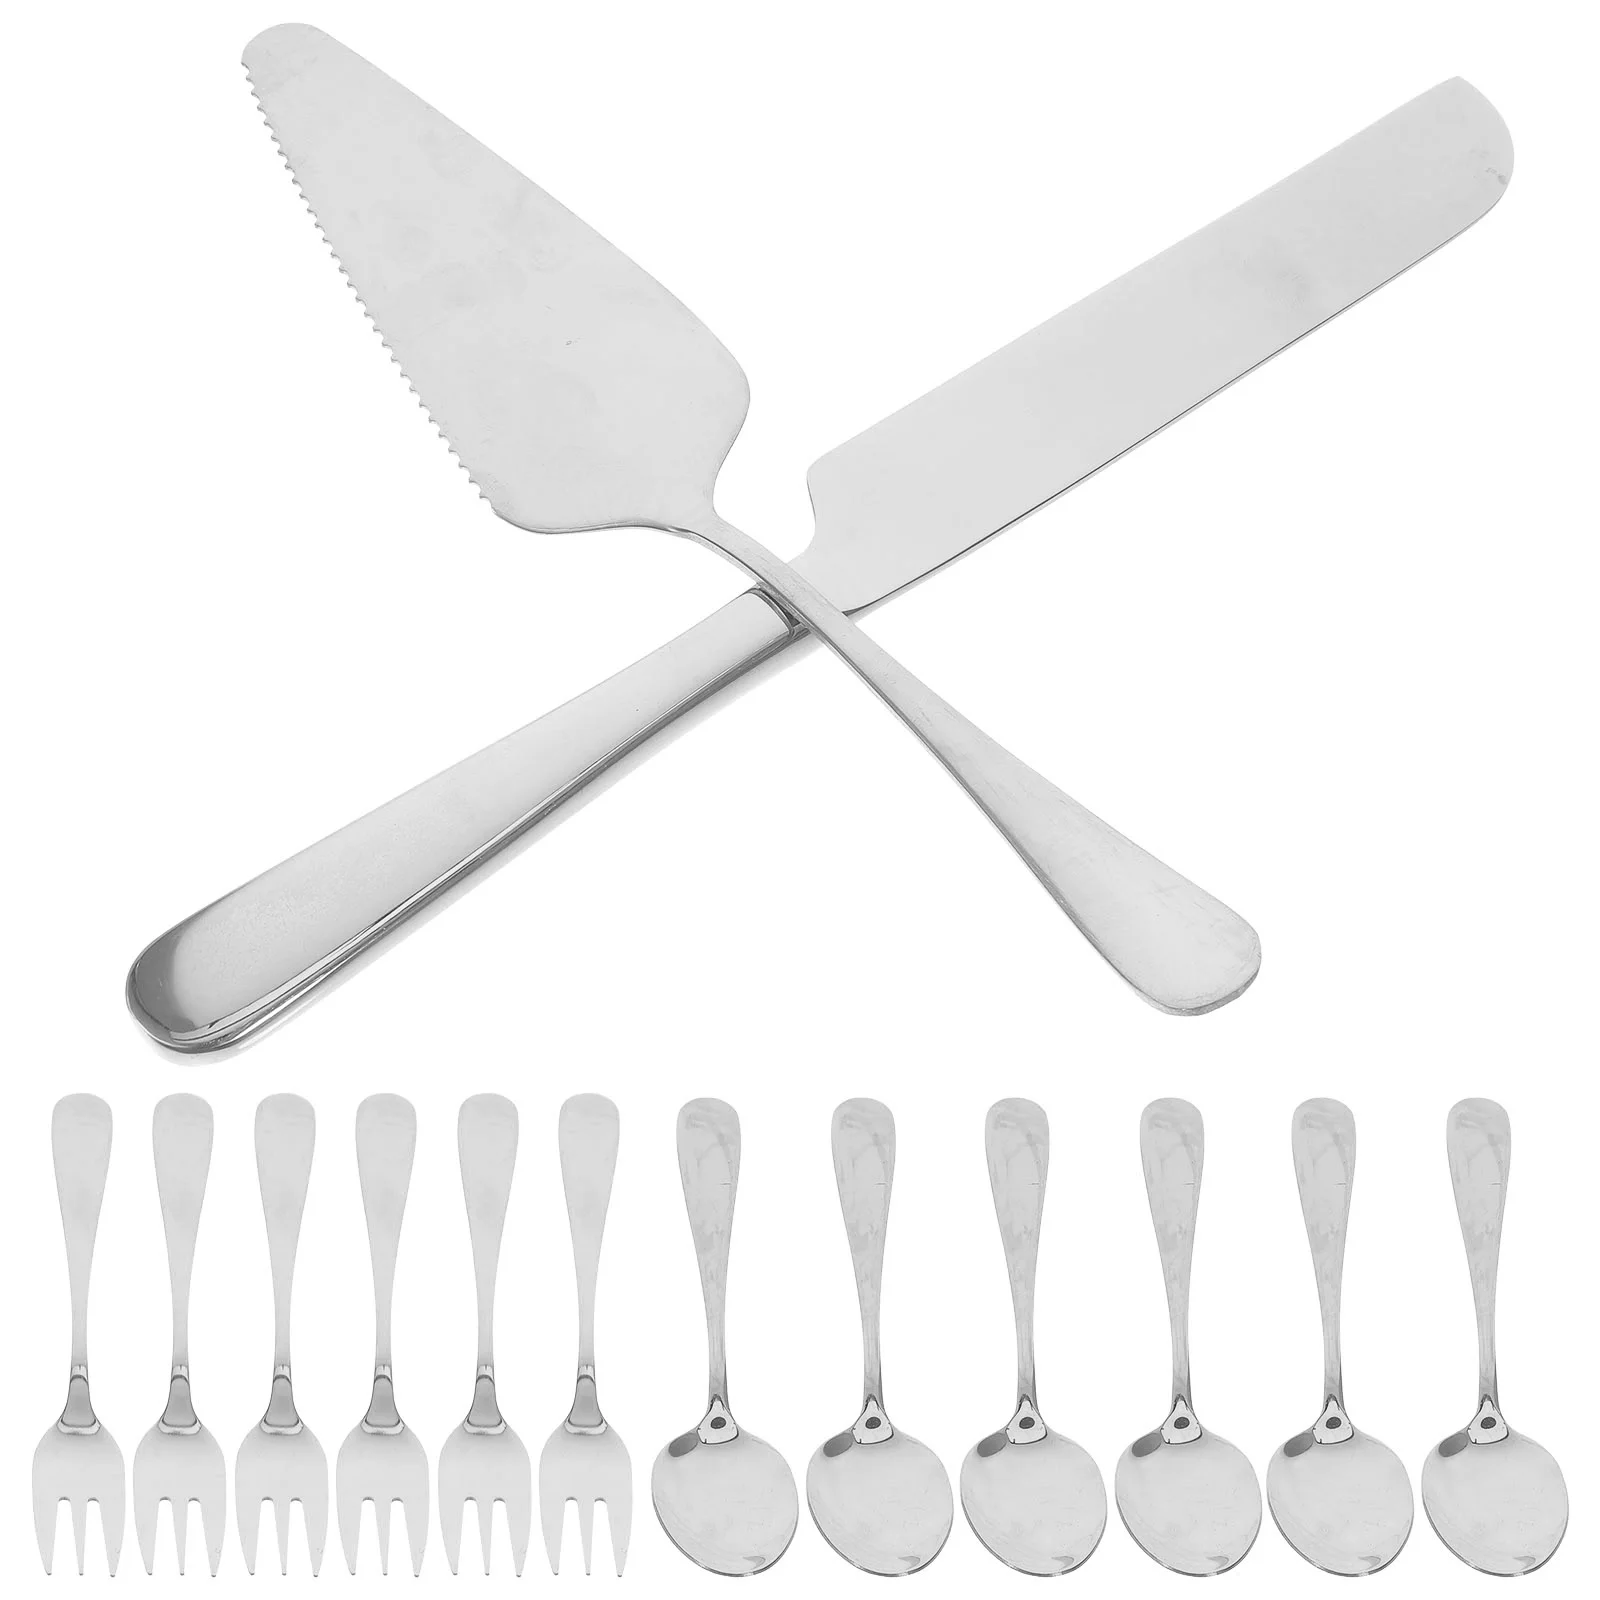 

Bread Kit Fork Knife Combination Mousse Cake Dessert Spoons Forks Pizza Cutting Tool Tools Supplies Banquet